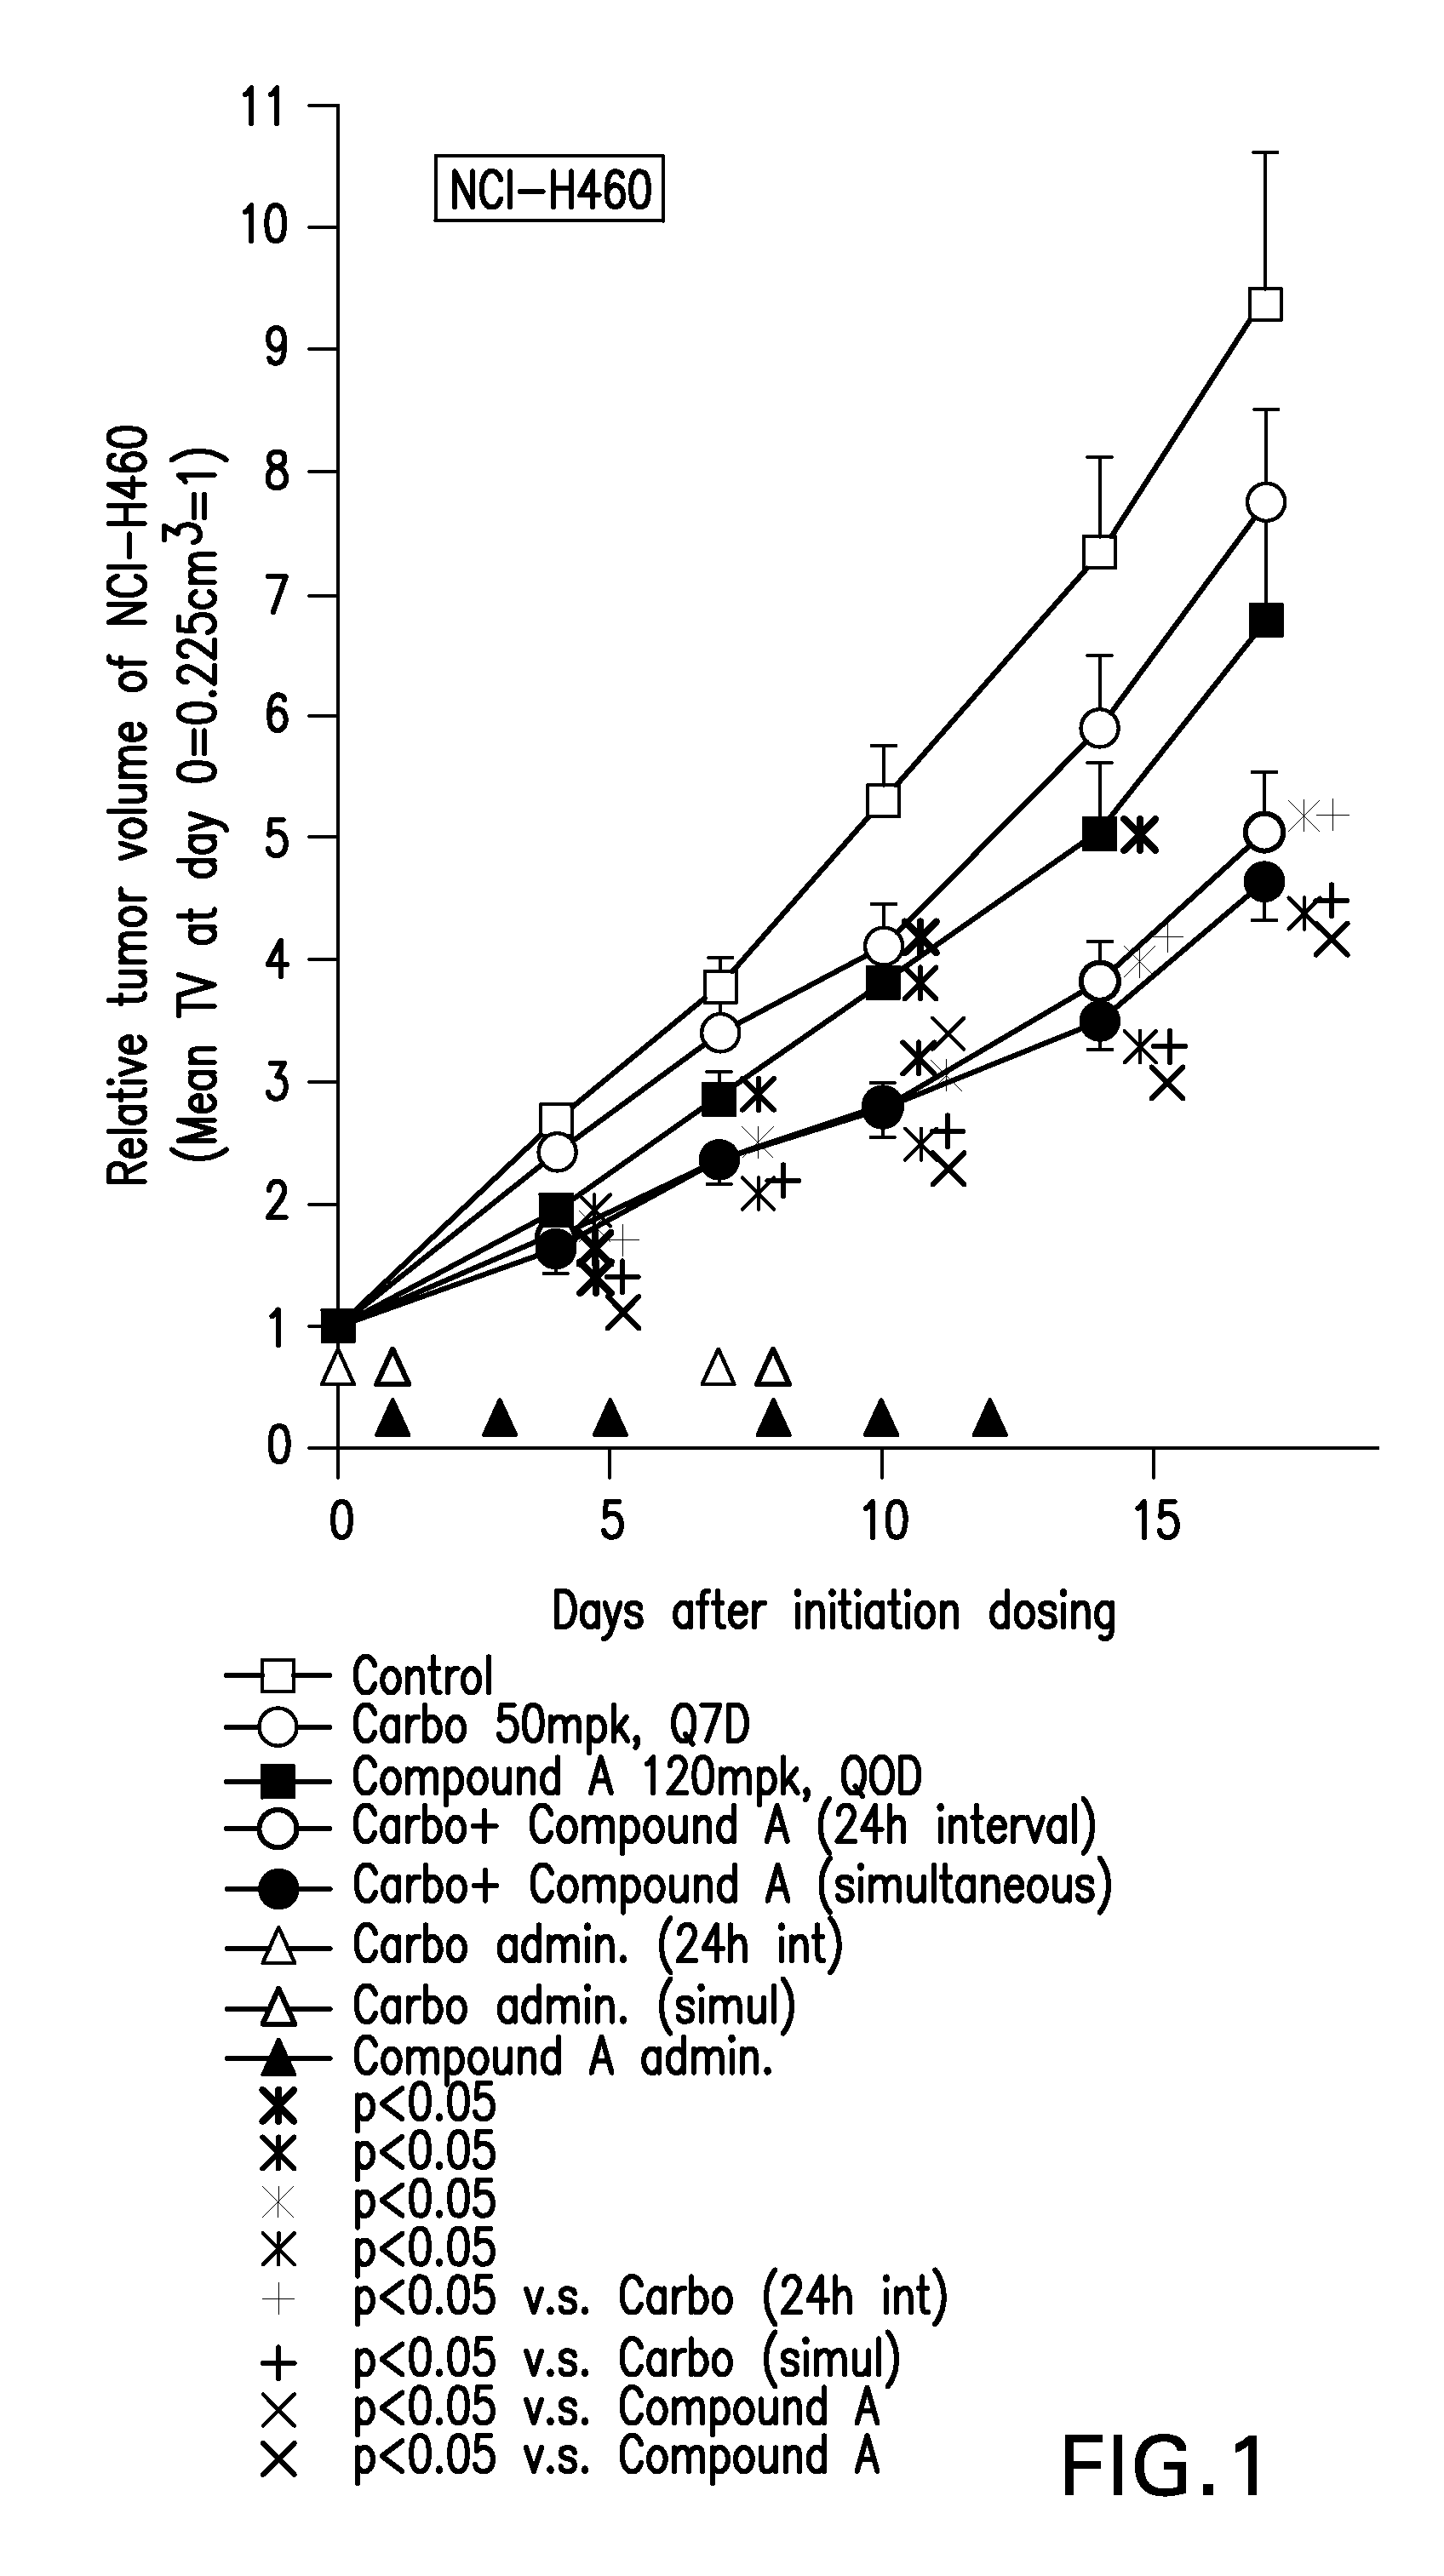 Combination cancer therapy with an AKT inhibitor and other anticancer agents